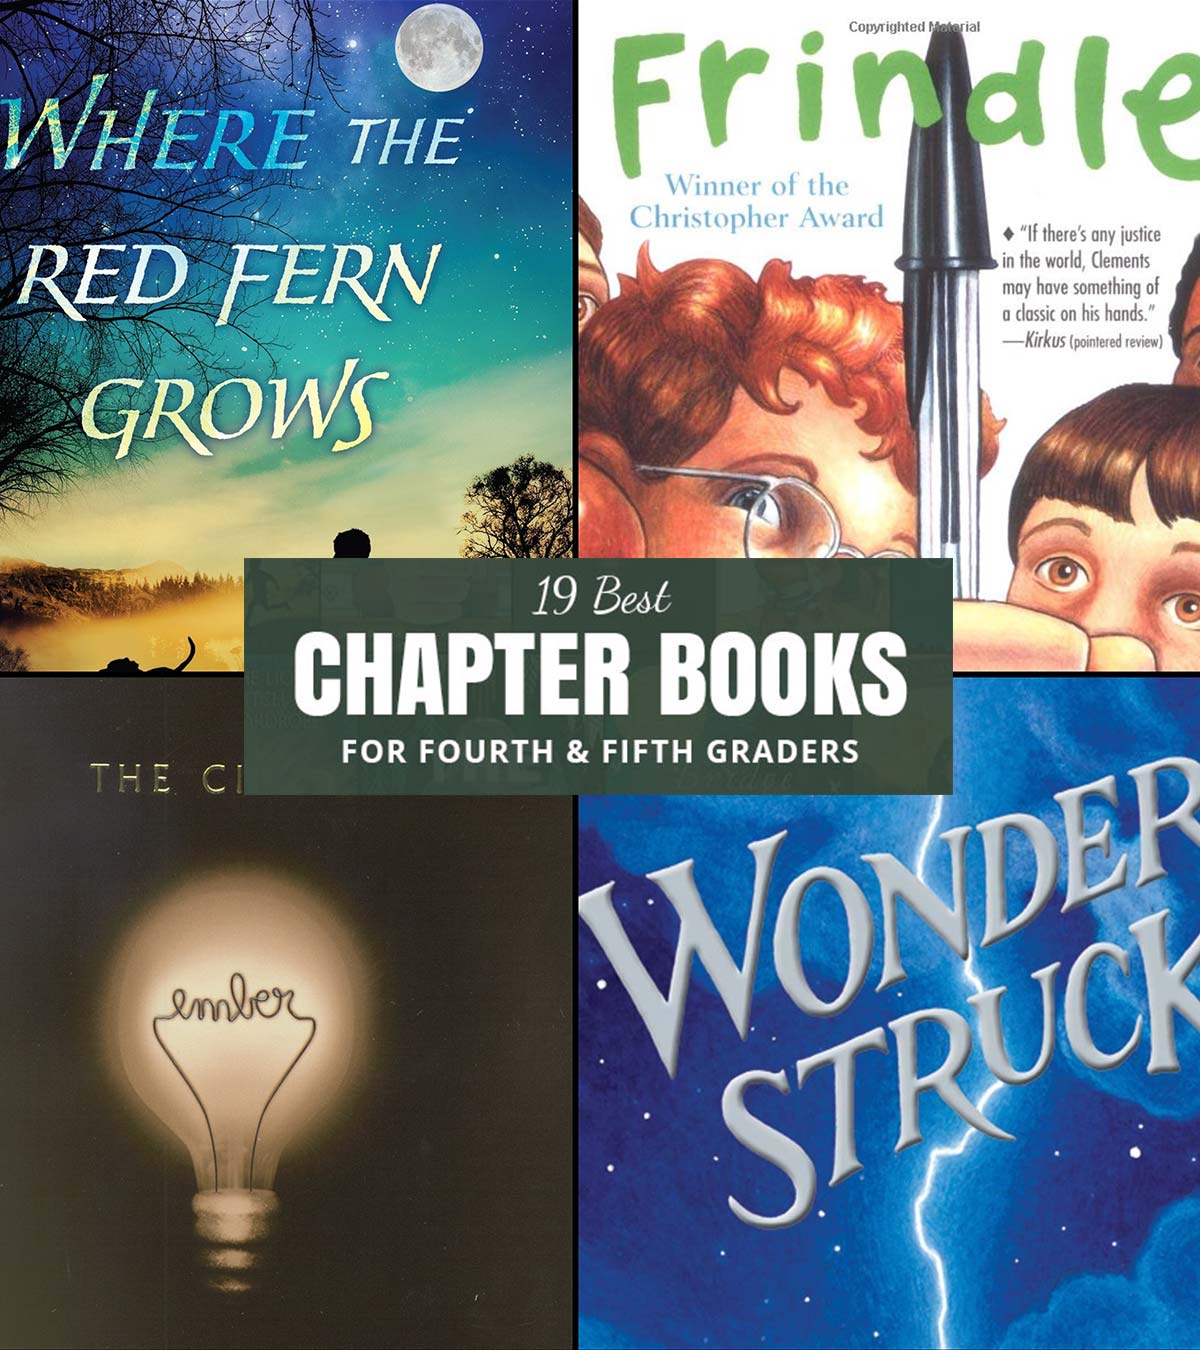 19 Best Chapter Books For Fourth and Fifth Graders